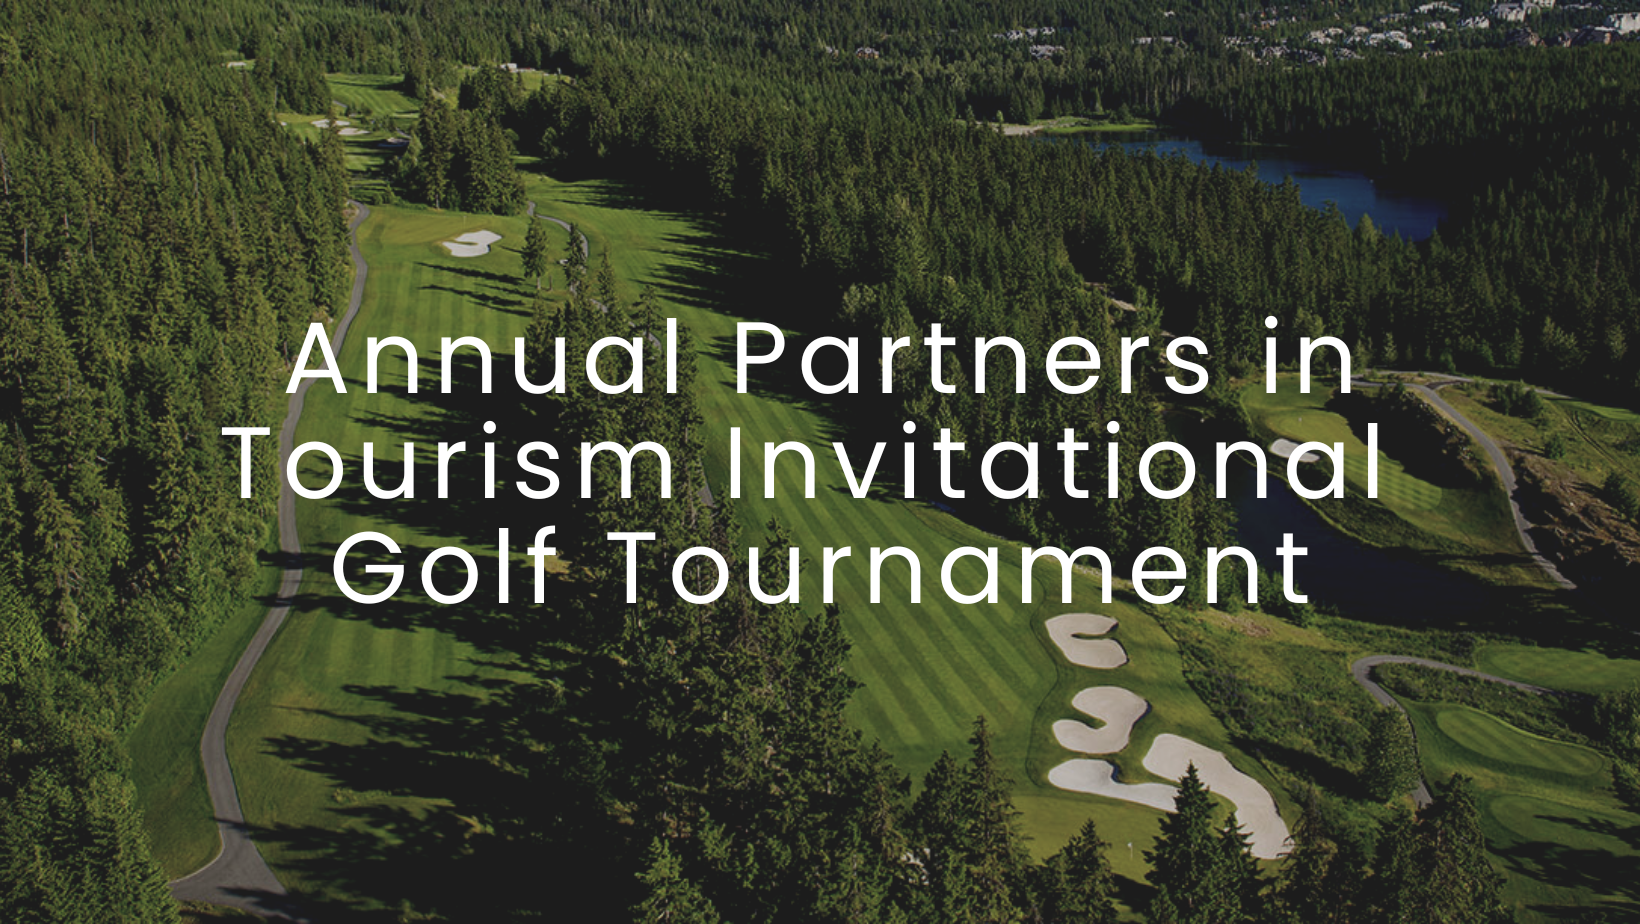 Annual Partners in Tourism Invitational Golf Tournament